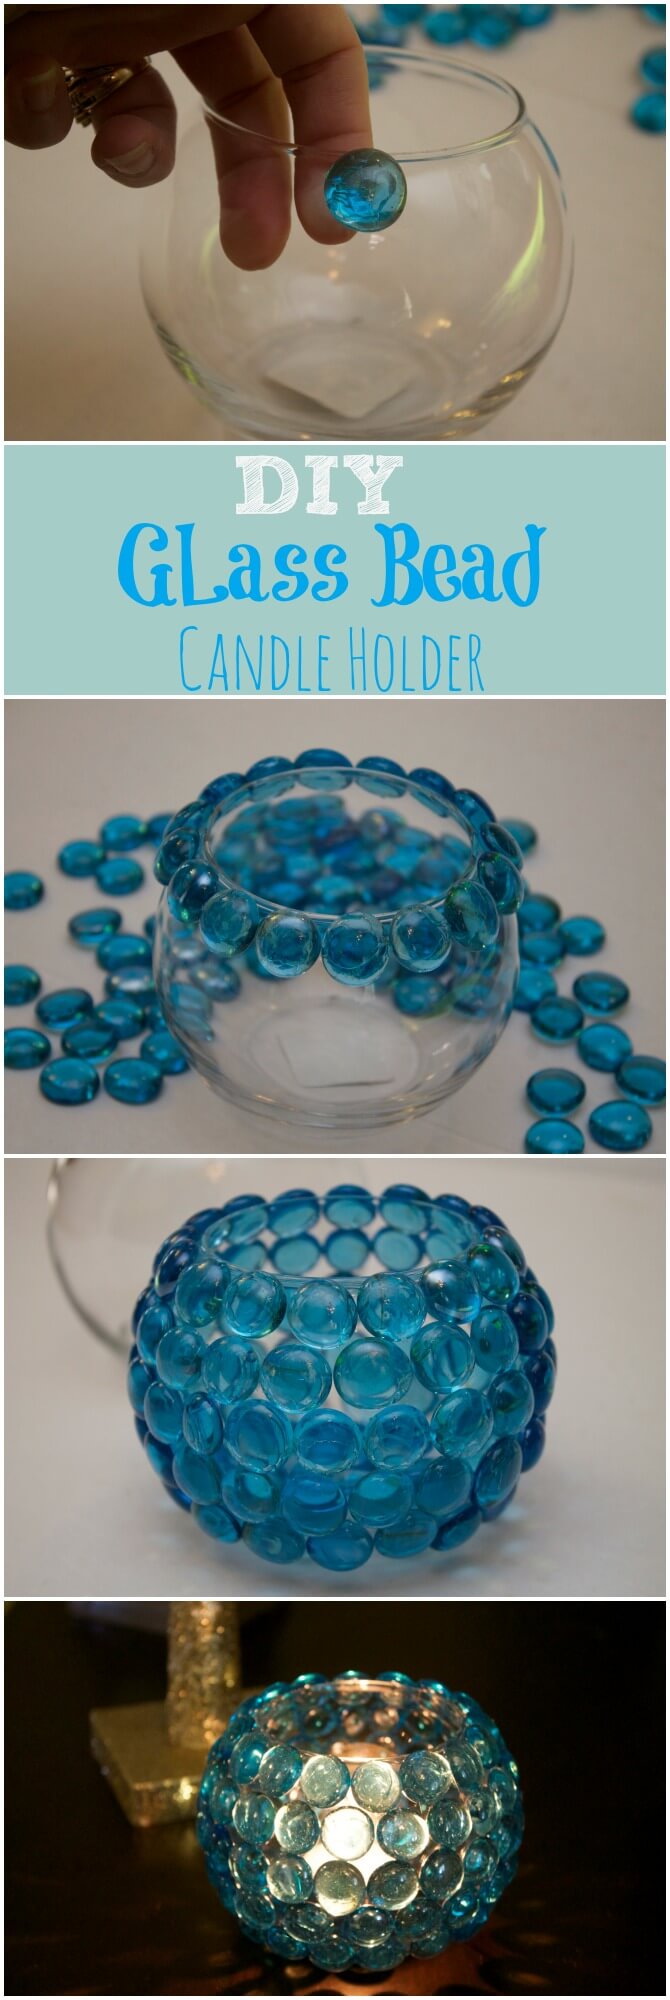 Candle Holder with Pretty Glass Gems